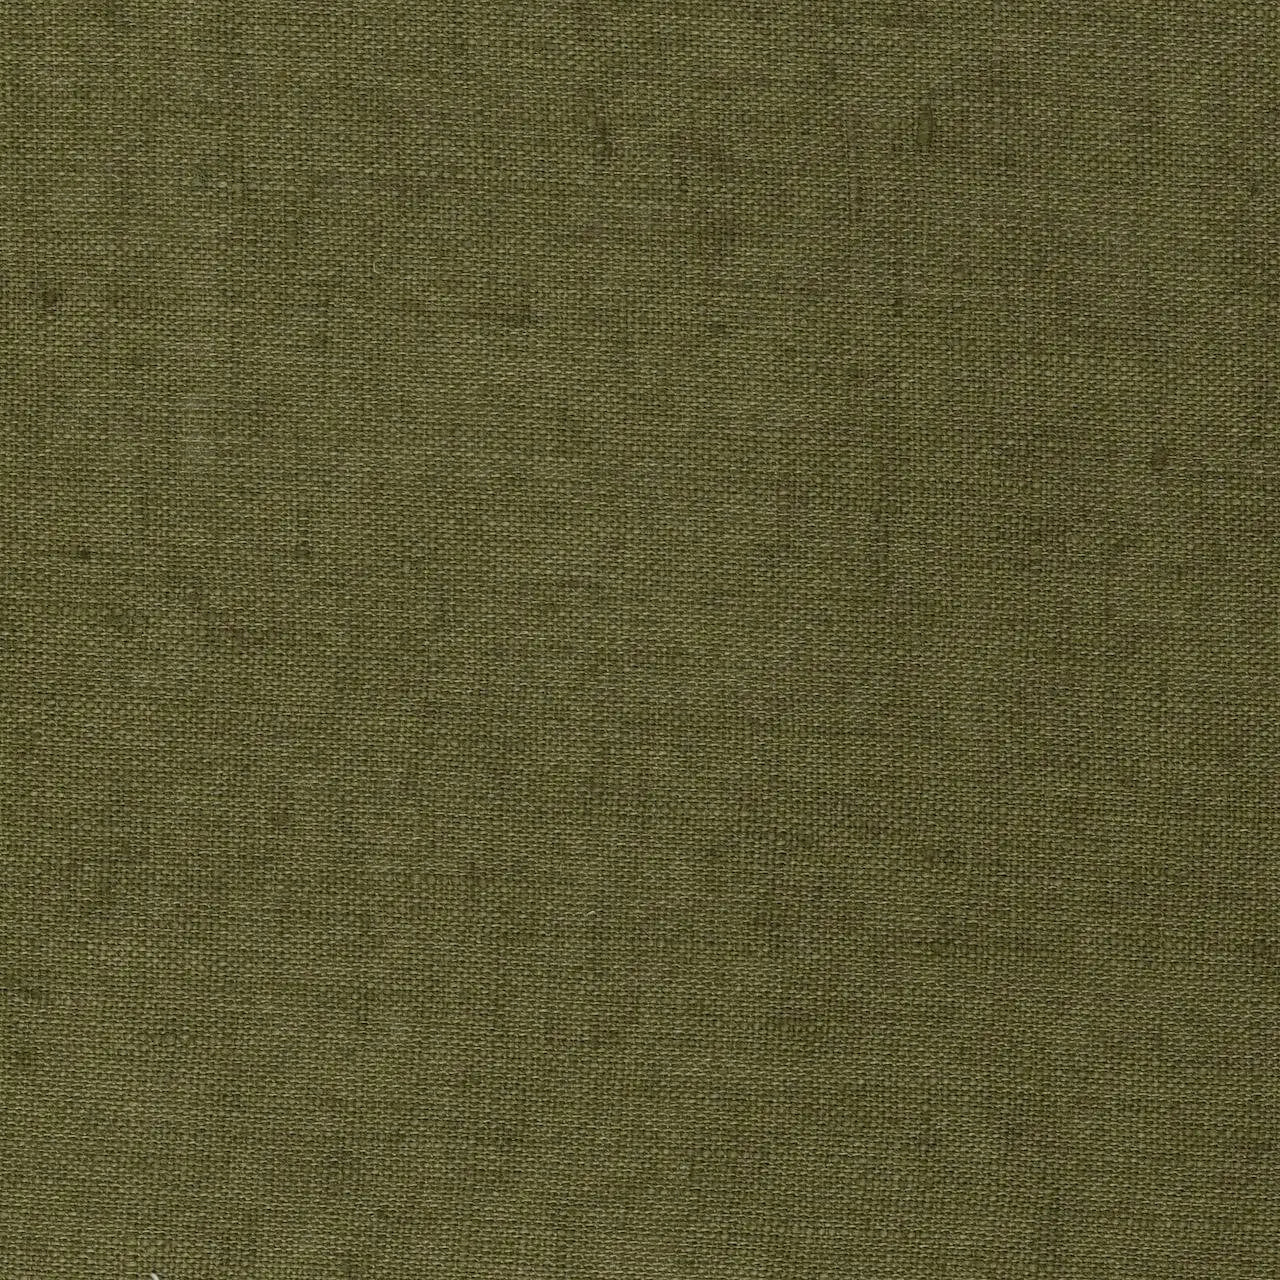 Washed Pure Olive Green Linen Fabric 205 g/m²